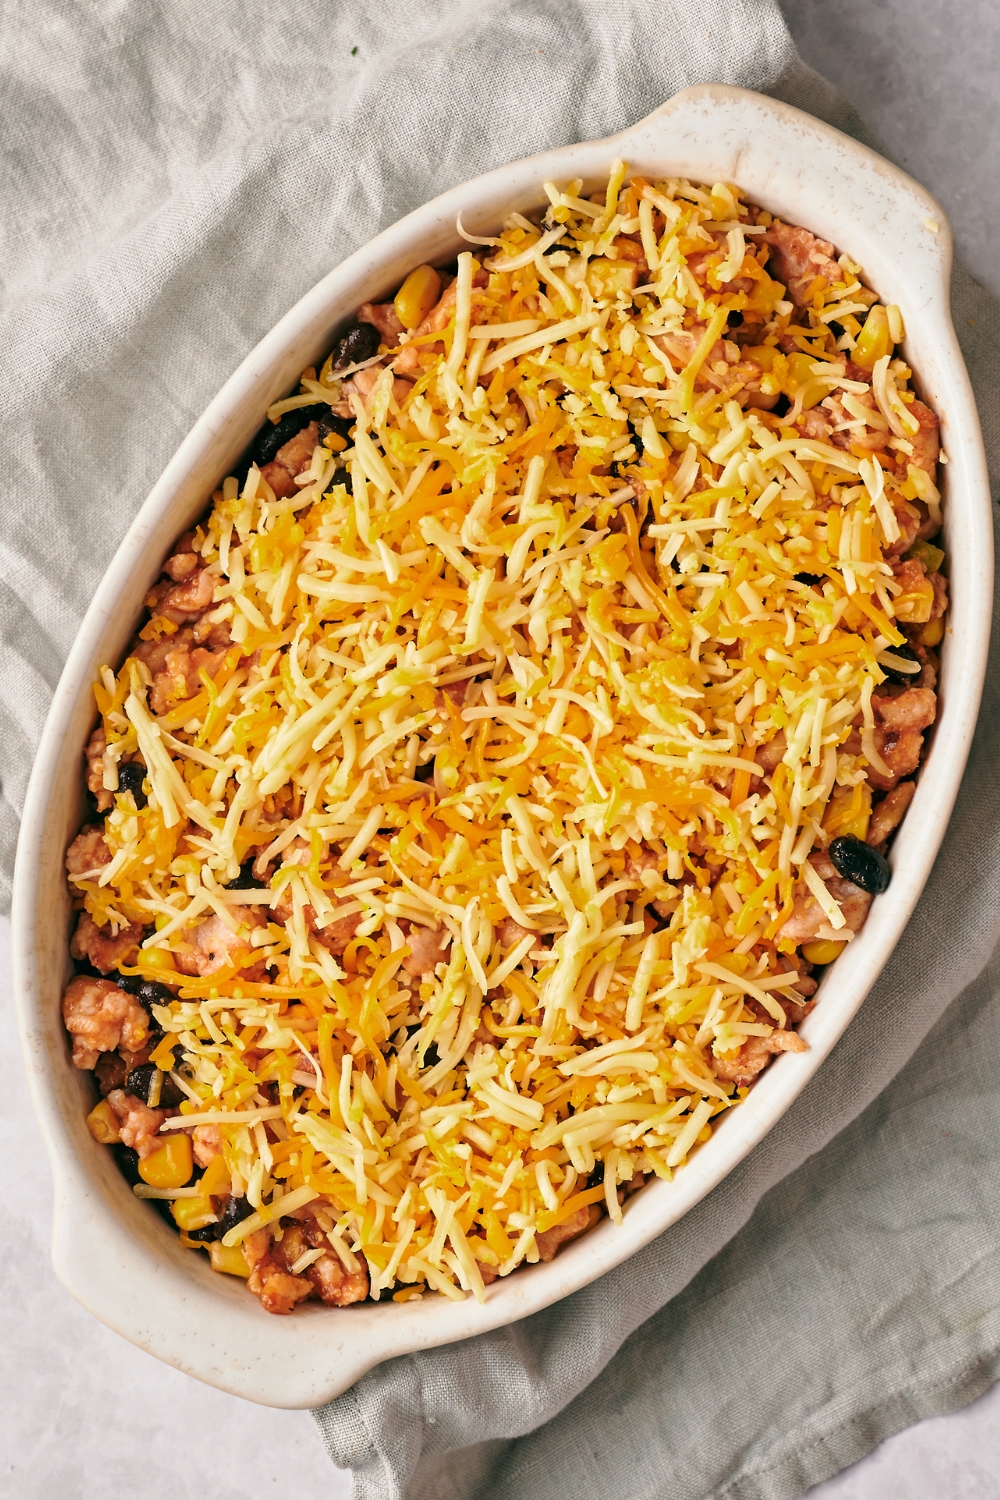 A casserole dish with unbaked taco rice casserole.